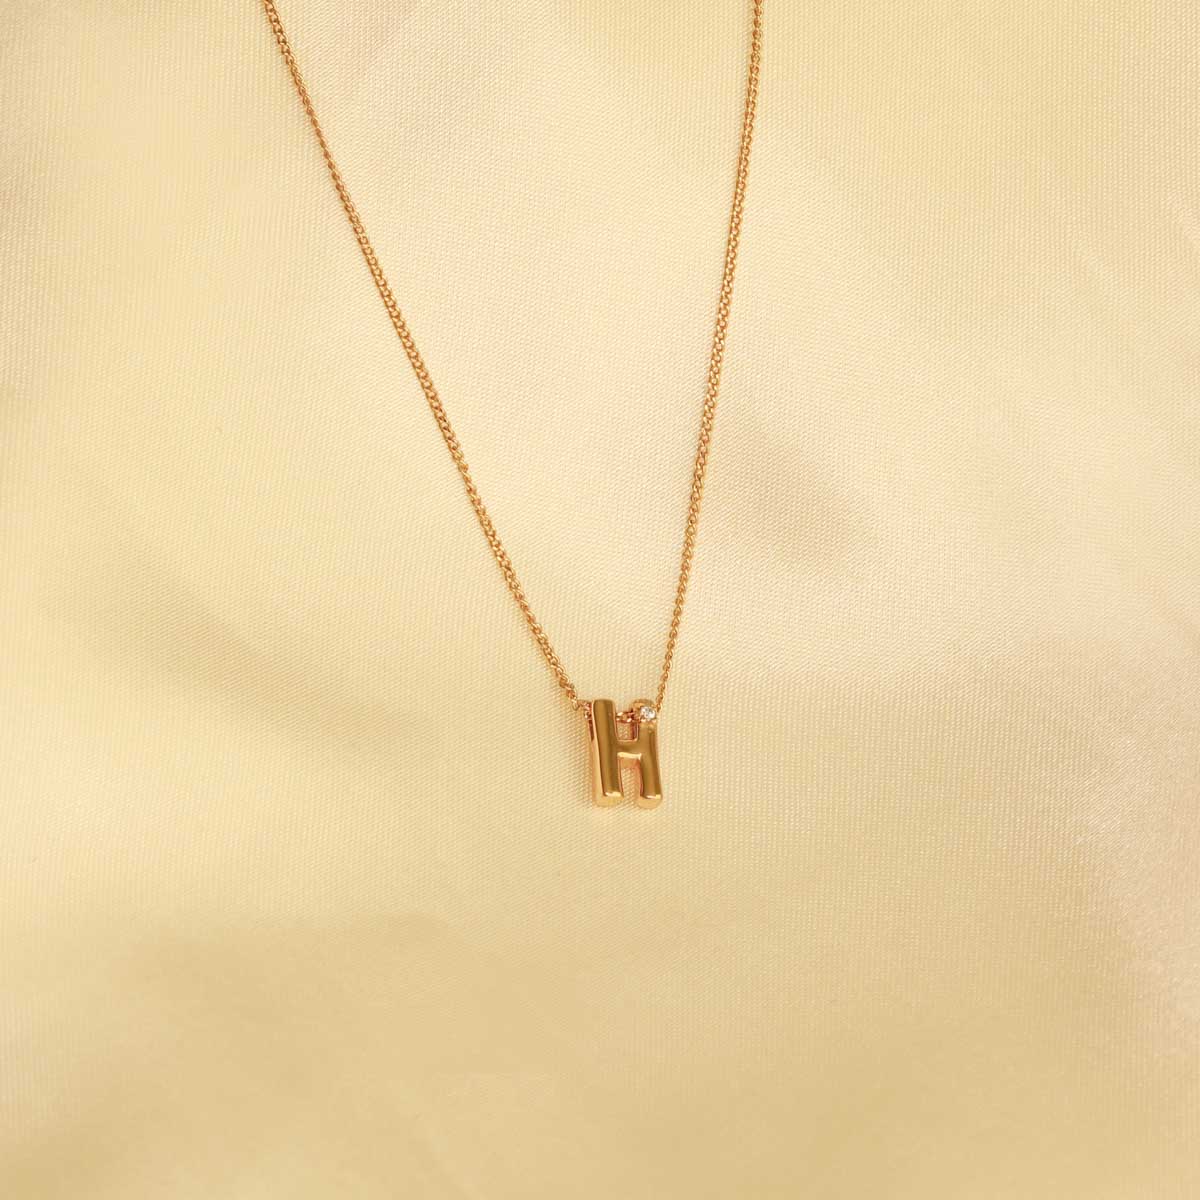 Flat lay shot of H Initial Pendant Necklace in Gold